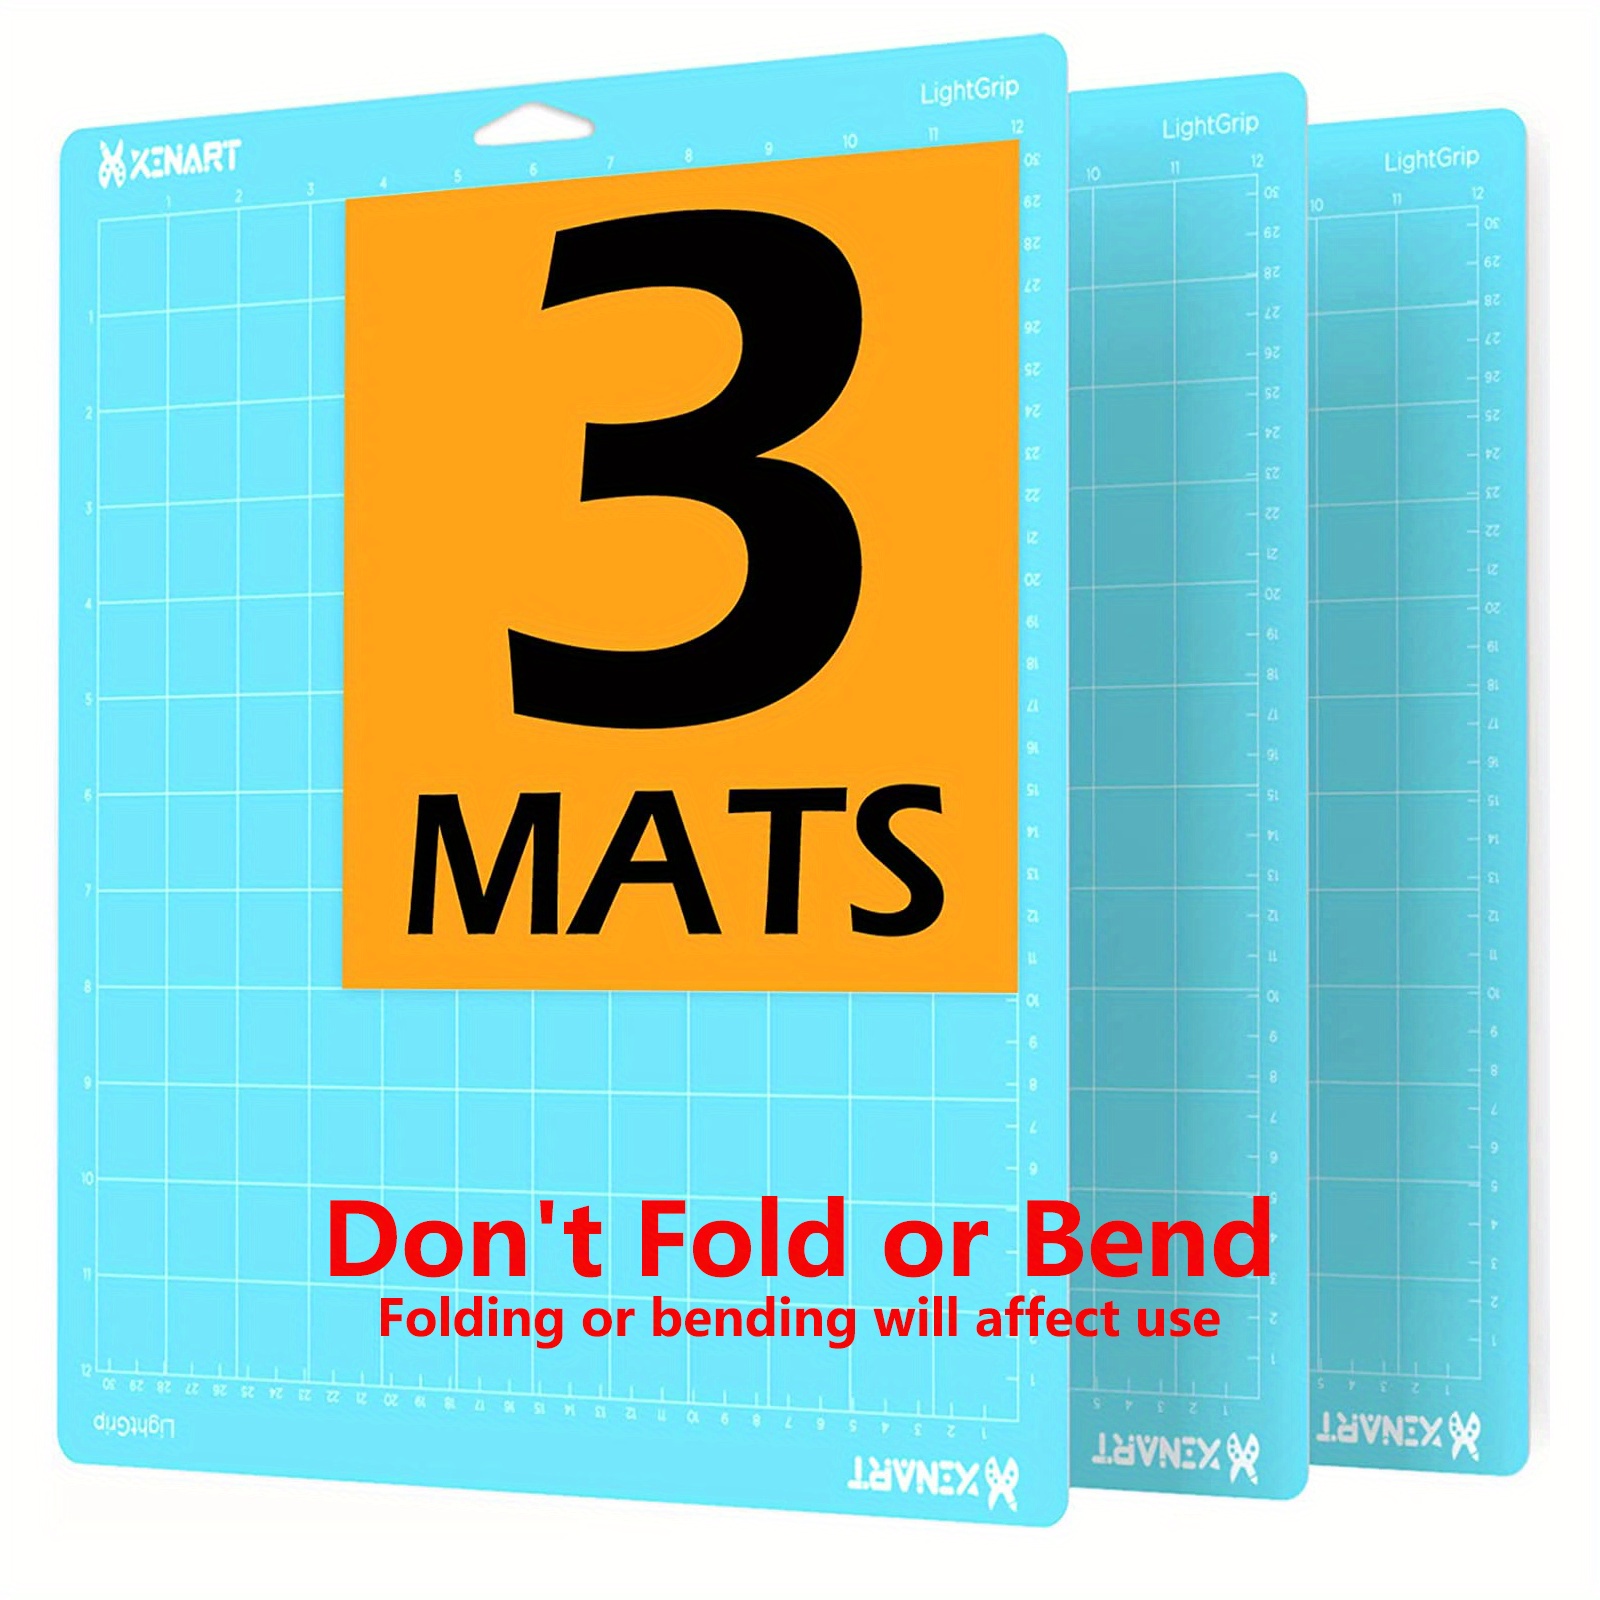 for Cutting Mat, 12 H by 24 L Nicapa Replacement Cutting Mat (3Pack)